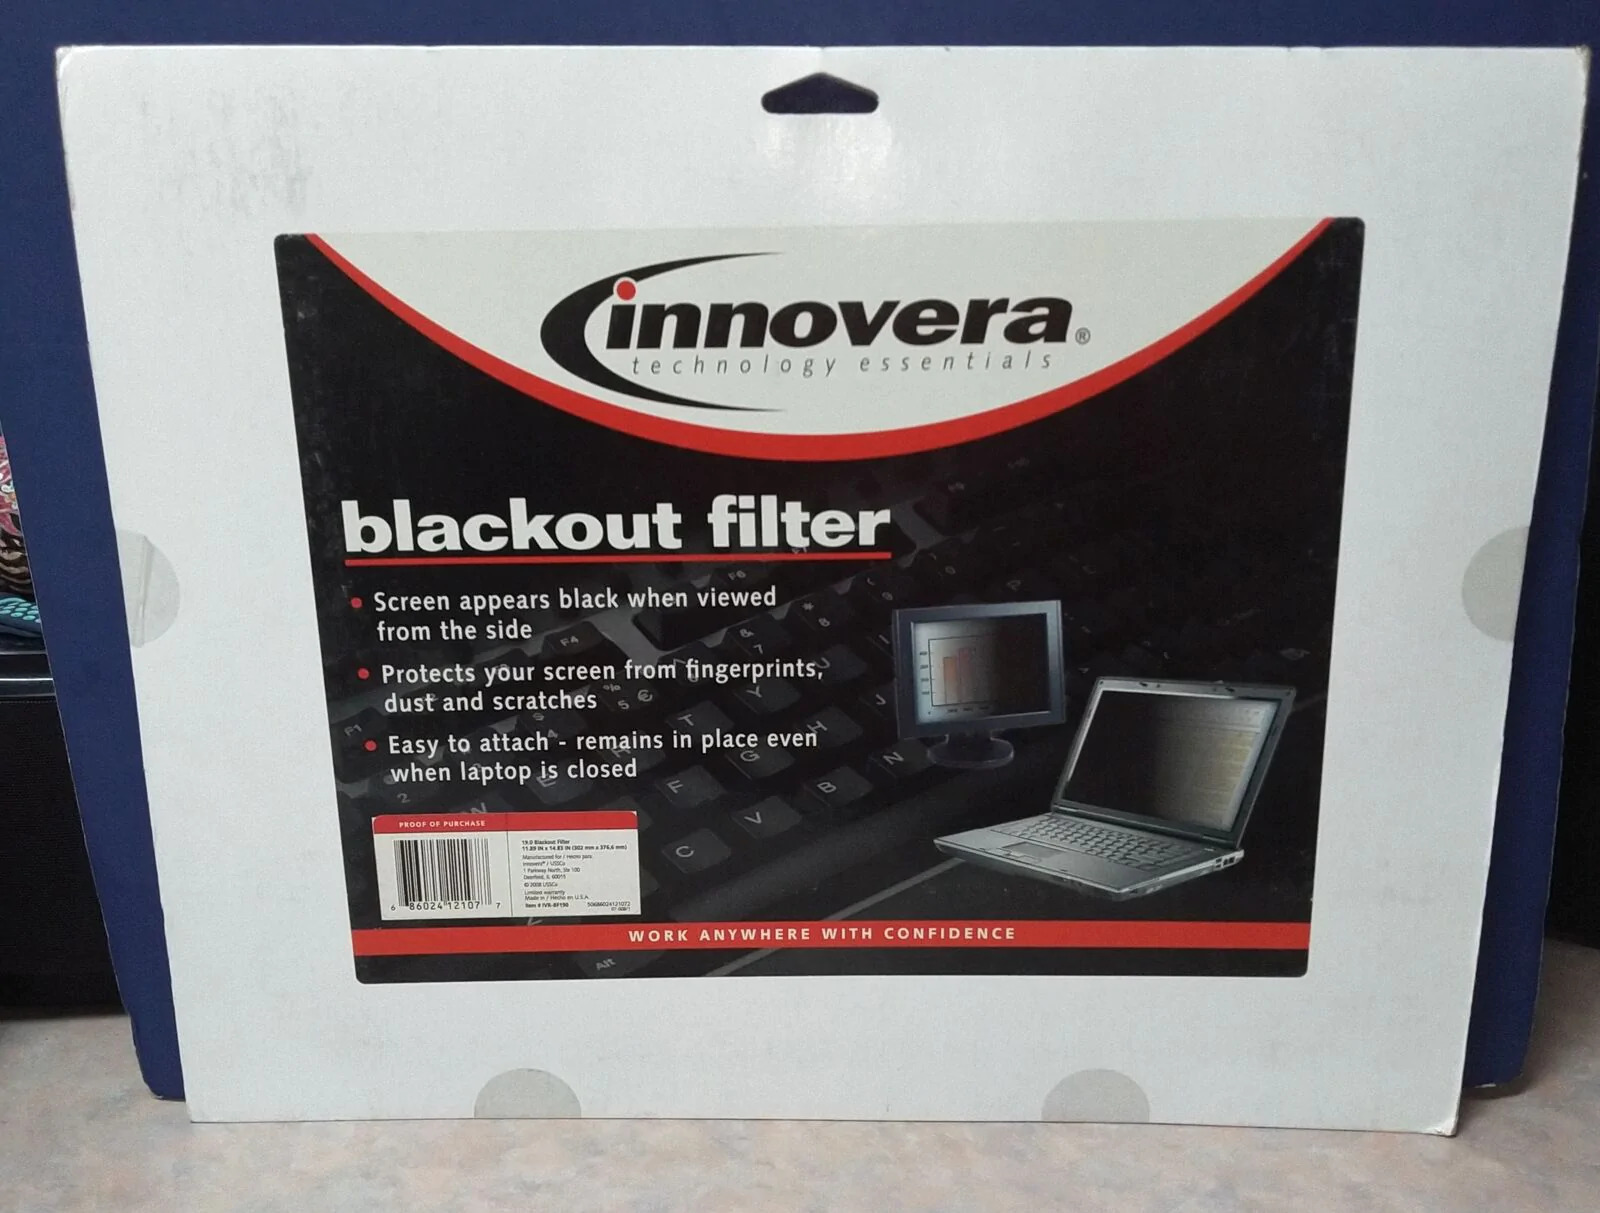 Innovera 19.0 Computer Laptop Monitor Black Out Filter ( IVR-BF190 )